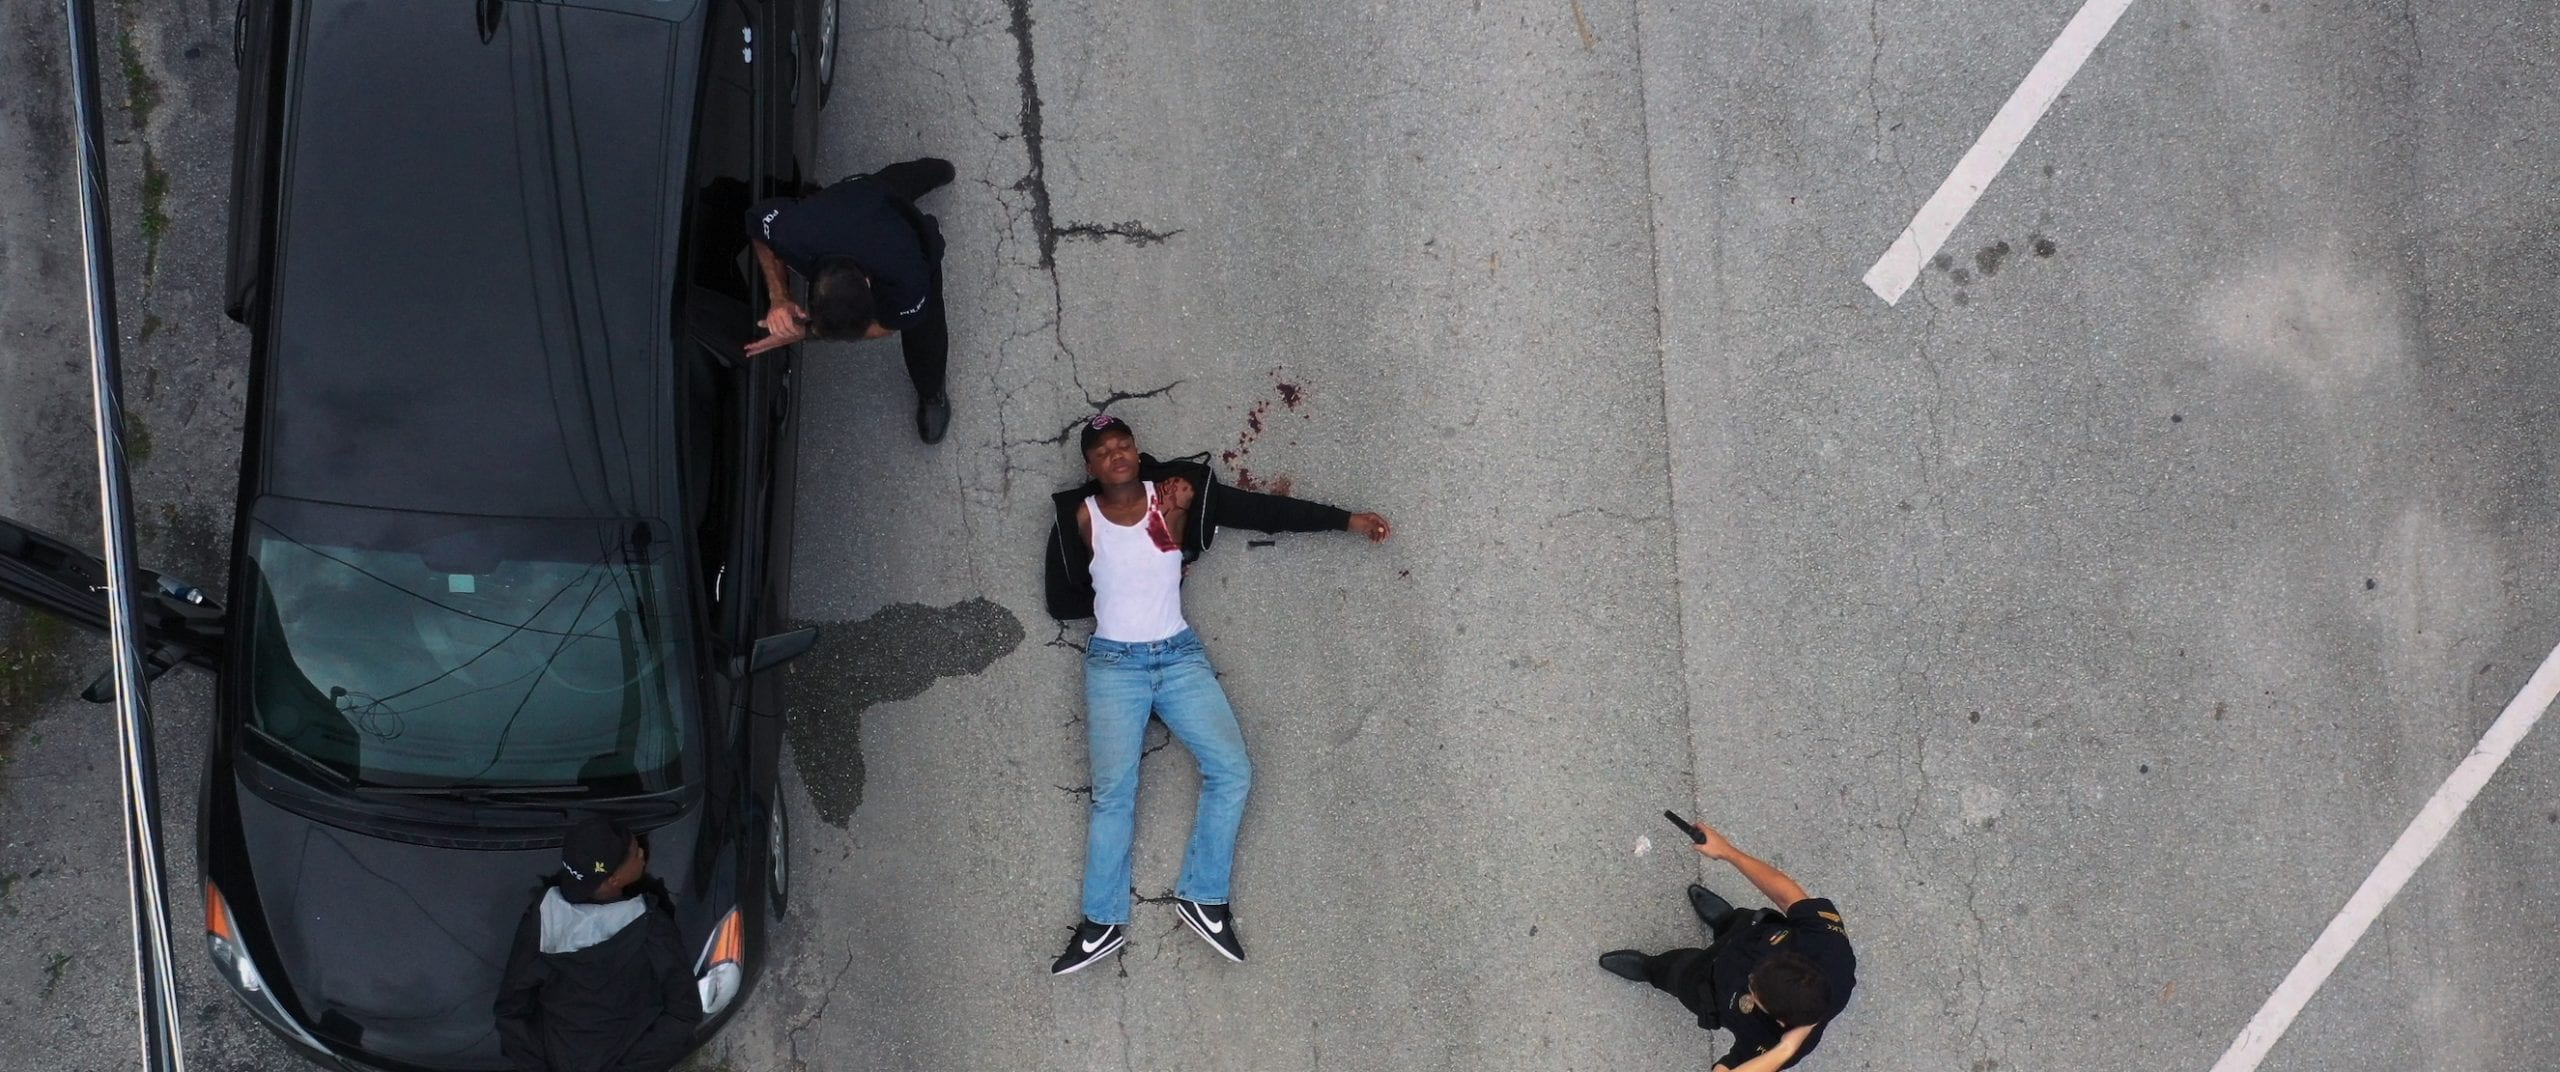 Black Violin One Step Music Video Overhead view of two police officers by a black car and a man wearing white tank top and jeans laying shot on the street